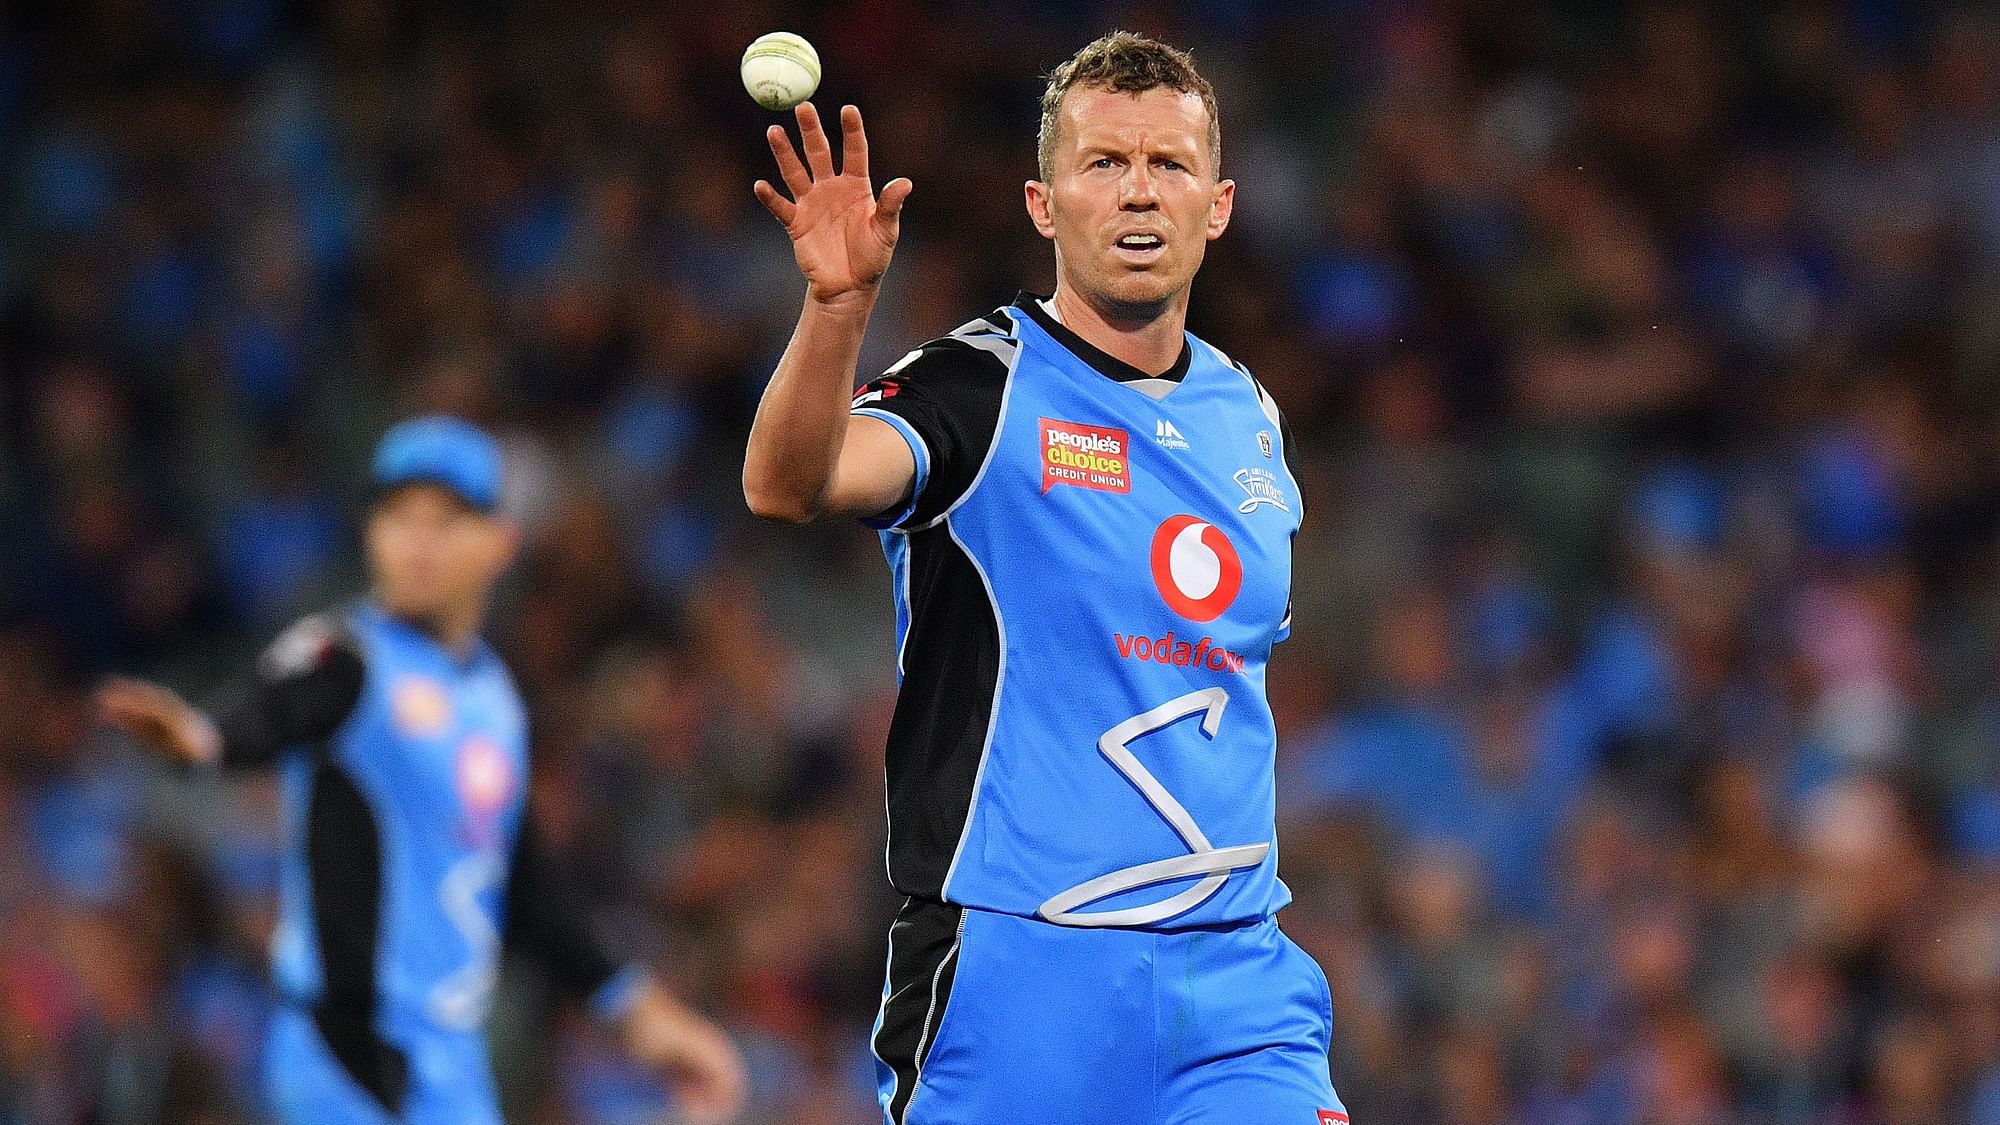 Australia fast bowler Peter Siddle has received treatment for smoke inhalation after a Big Bash League (BBL) match between Sydney Thunder and Adelaide Strikers was abandoned in Canberra.